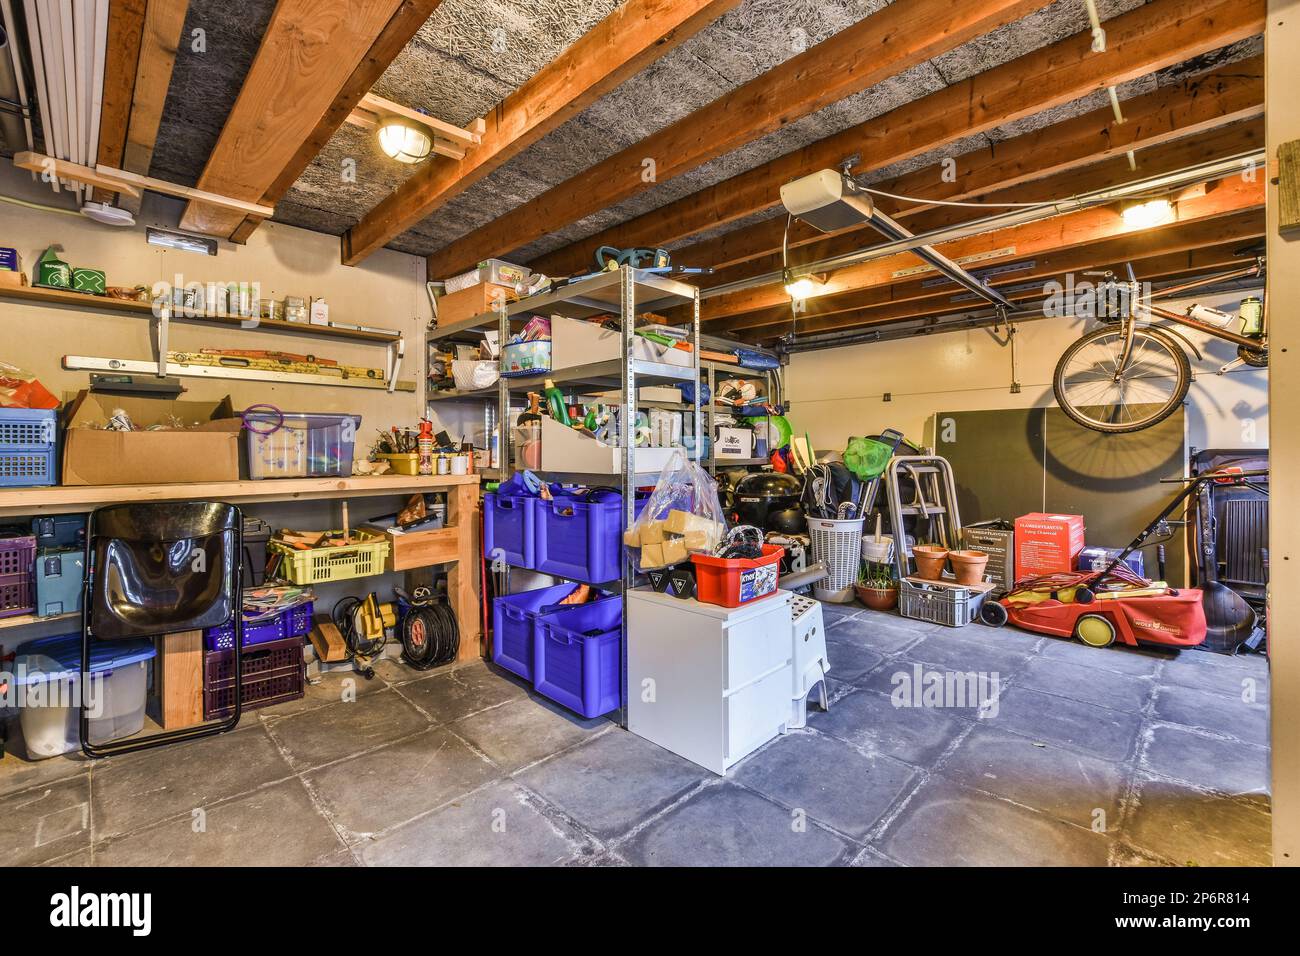 Amsterdam, Netherlands - 10 April, 2021: the inside of a garage with tools and boxes on the floor to be used for work or other things that are not in use Stock Photo